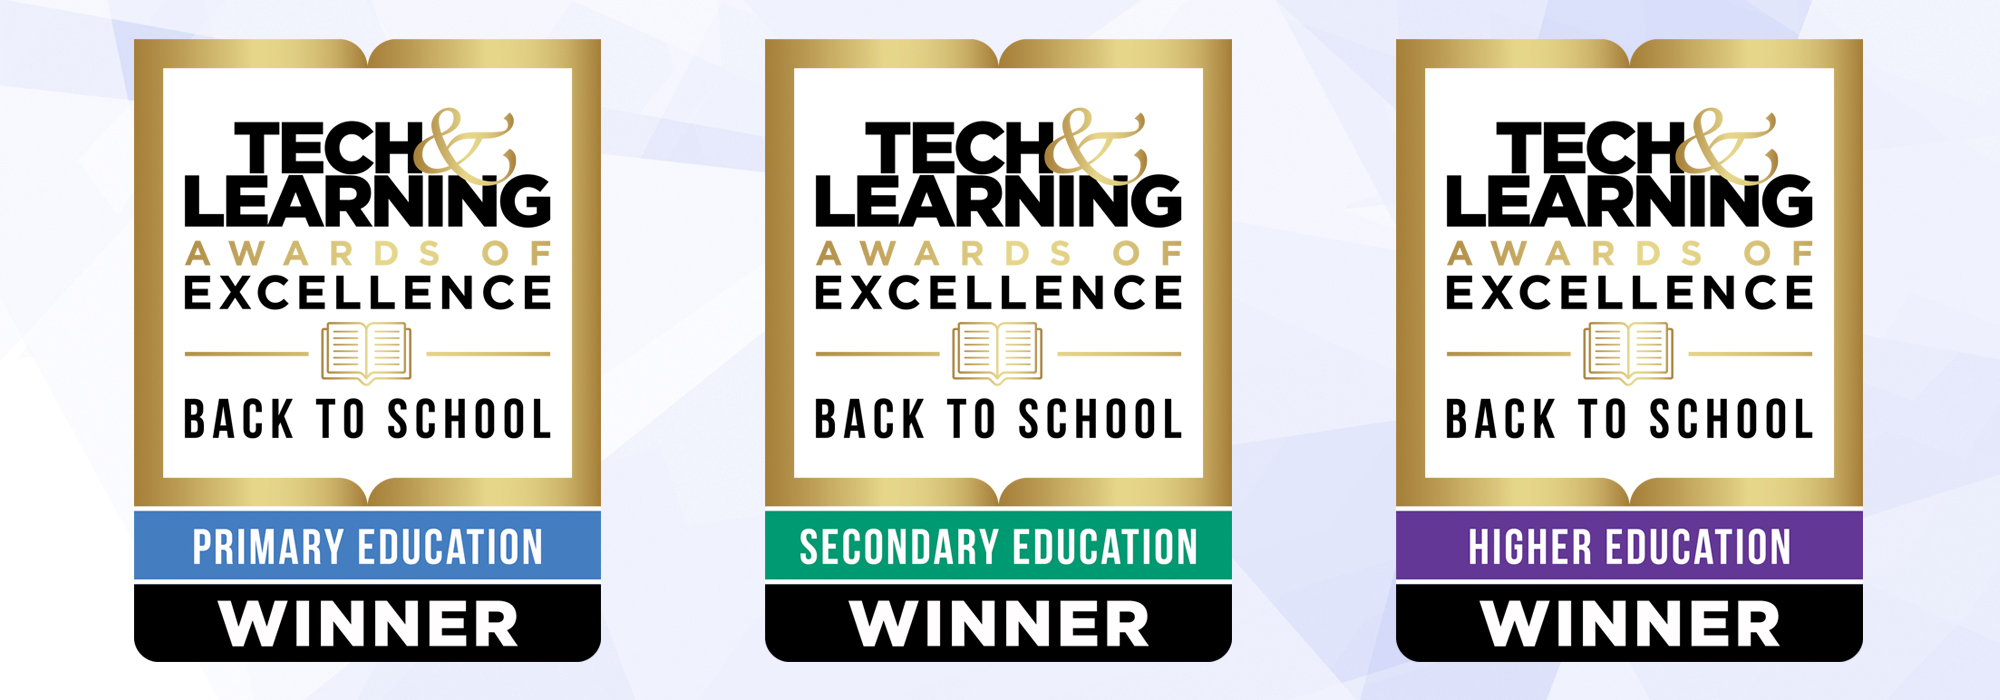 Three ViewSonic Products Named Winners of Tech & Learning Magazine’s 2021 “Best Tools for Back-to-School” Awards of Excellence